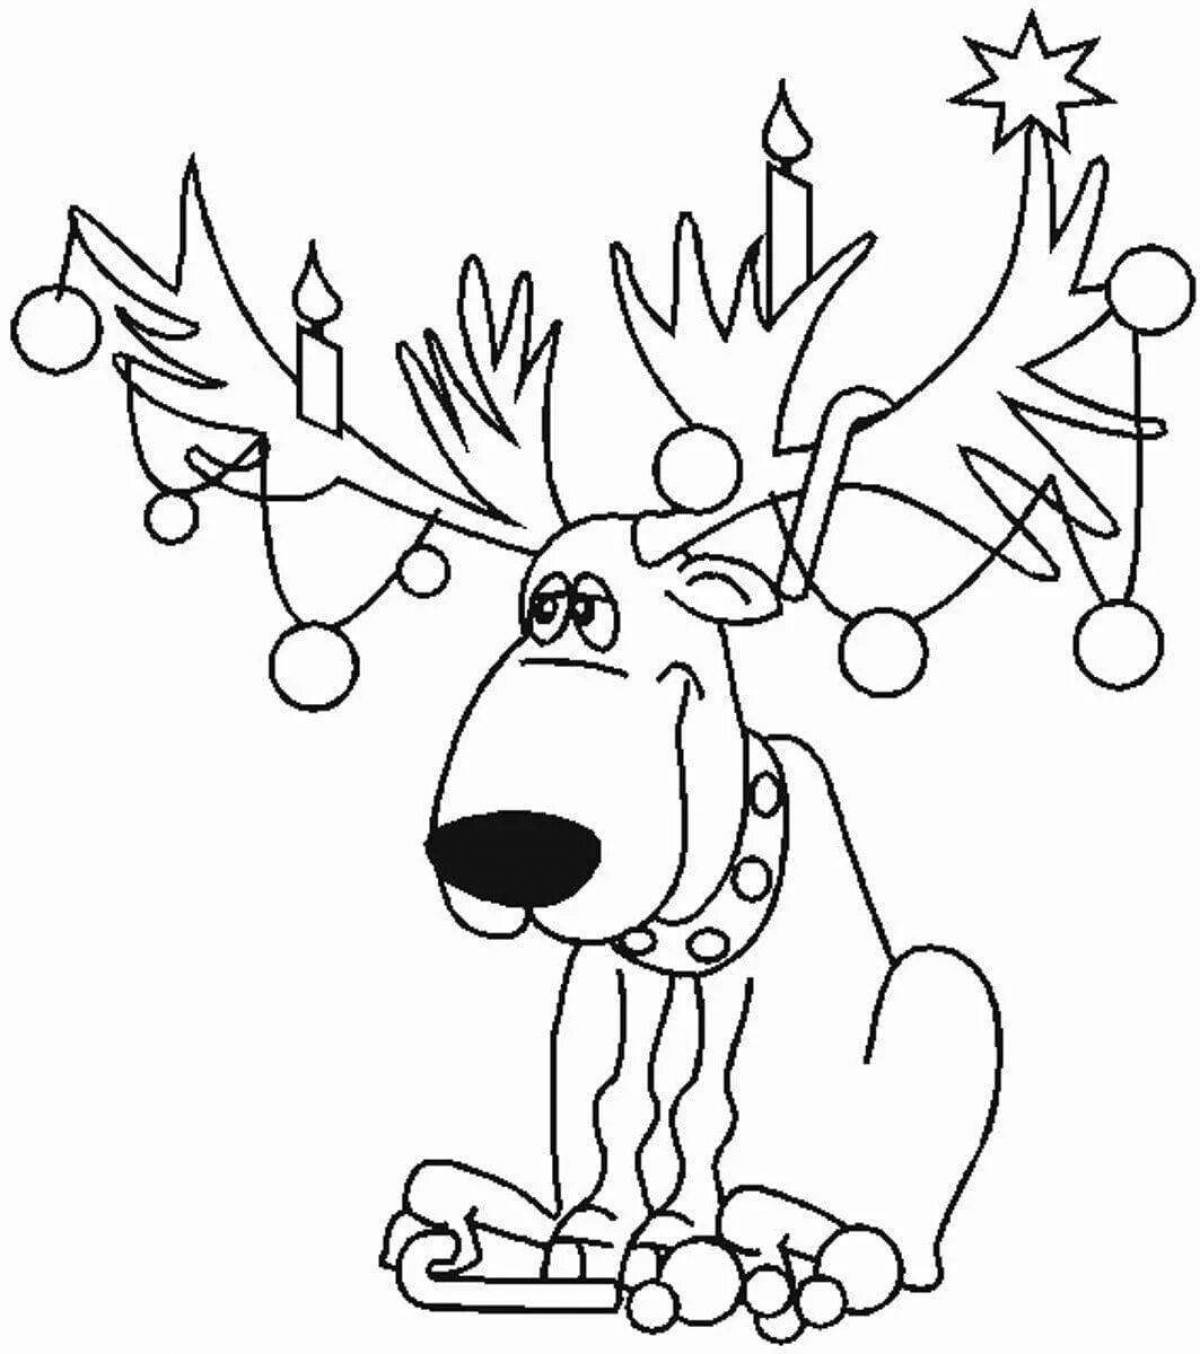 Fabulous Christmas reindeer coloring pages for kids